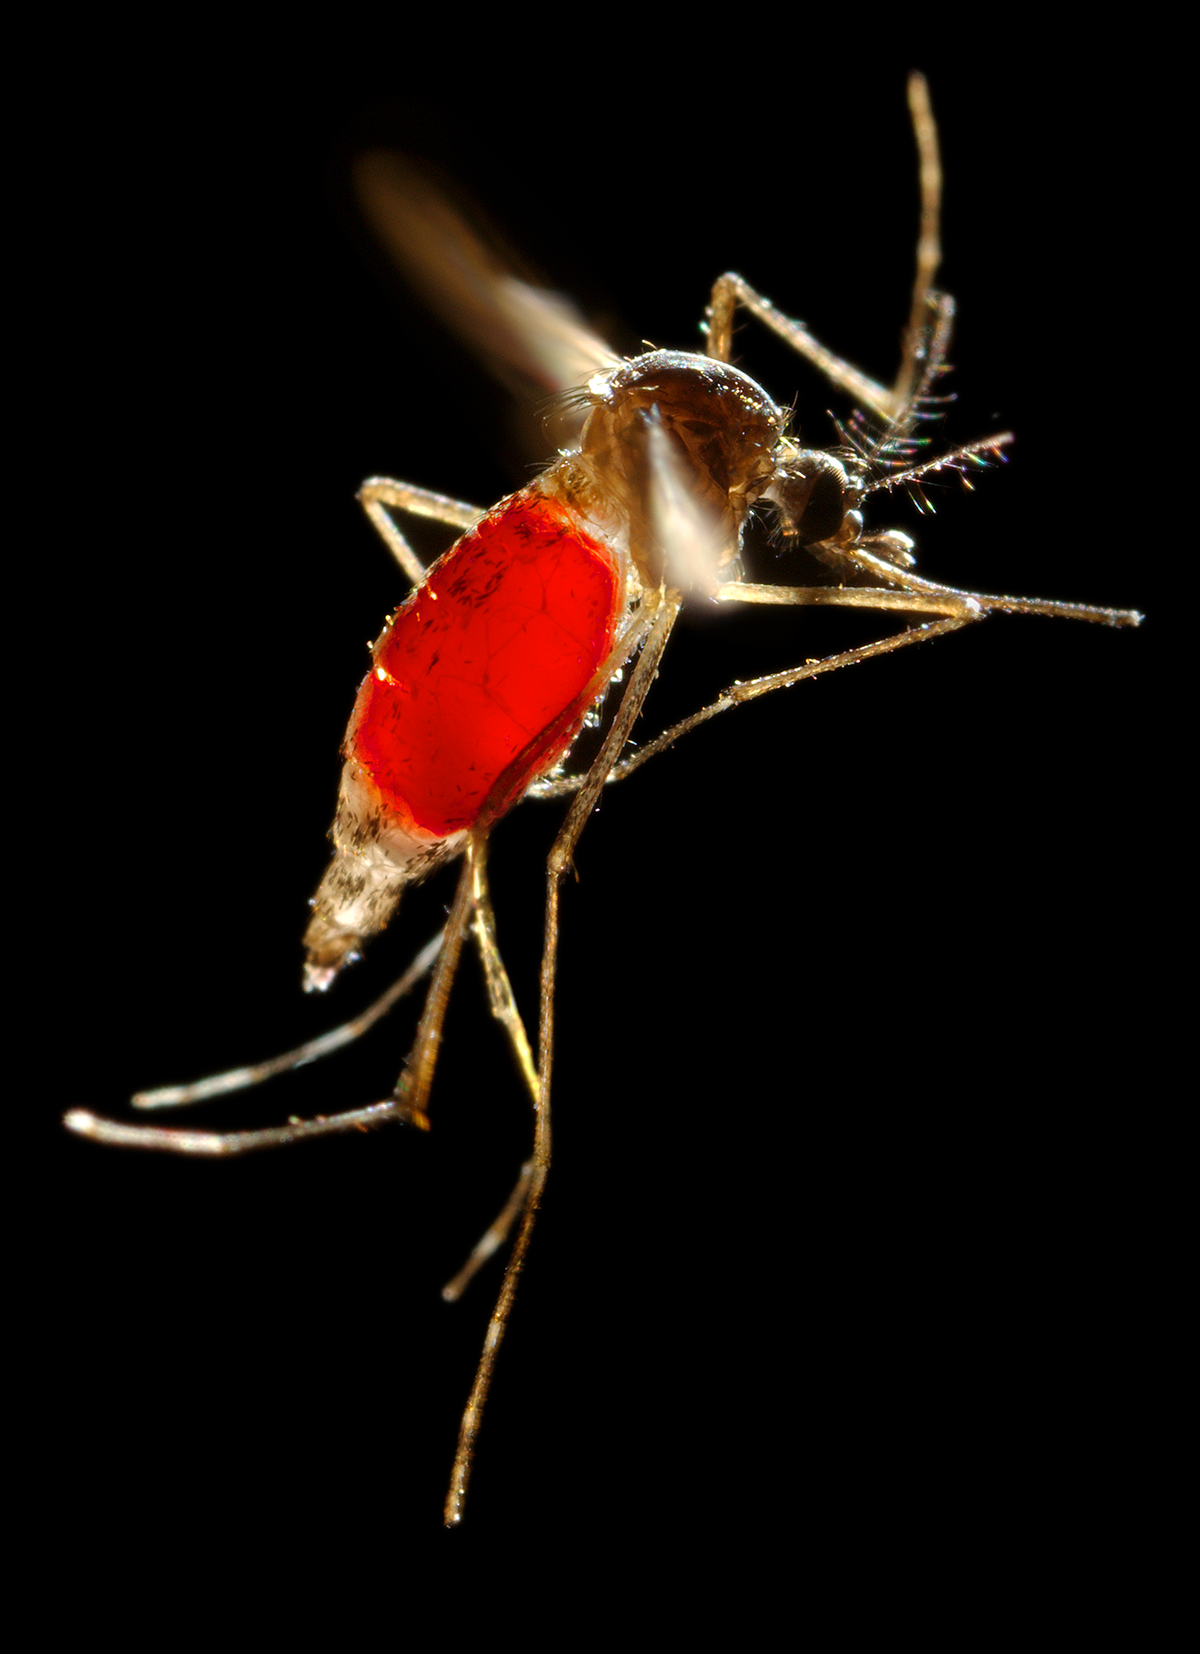 With a newly-obtained fiery red blood meal visible through her transparent abdomen, the now heavy female Aedes aegypti mosquito took flight as she left her host’s skin surface.